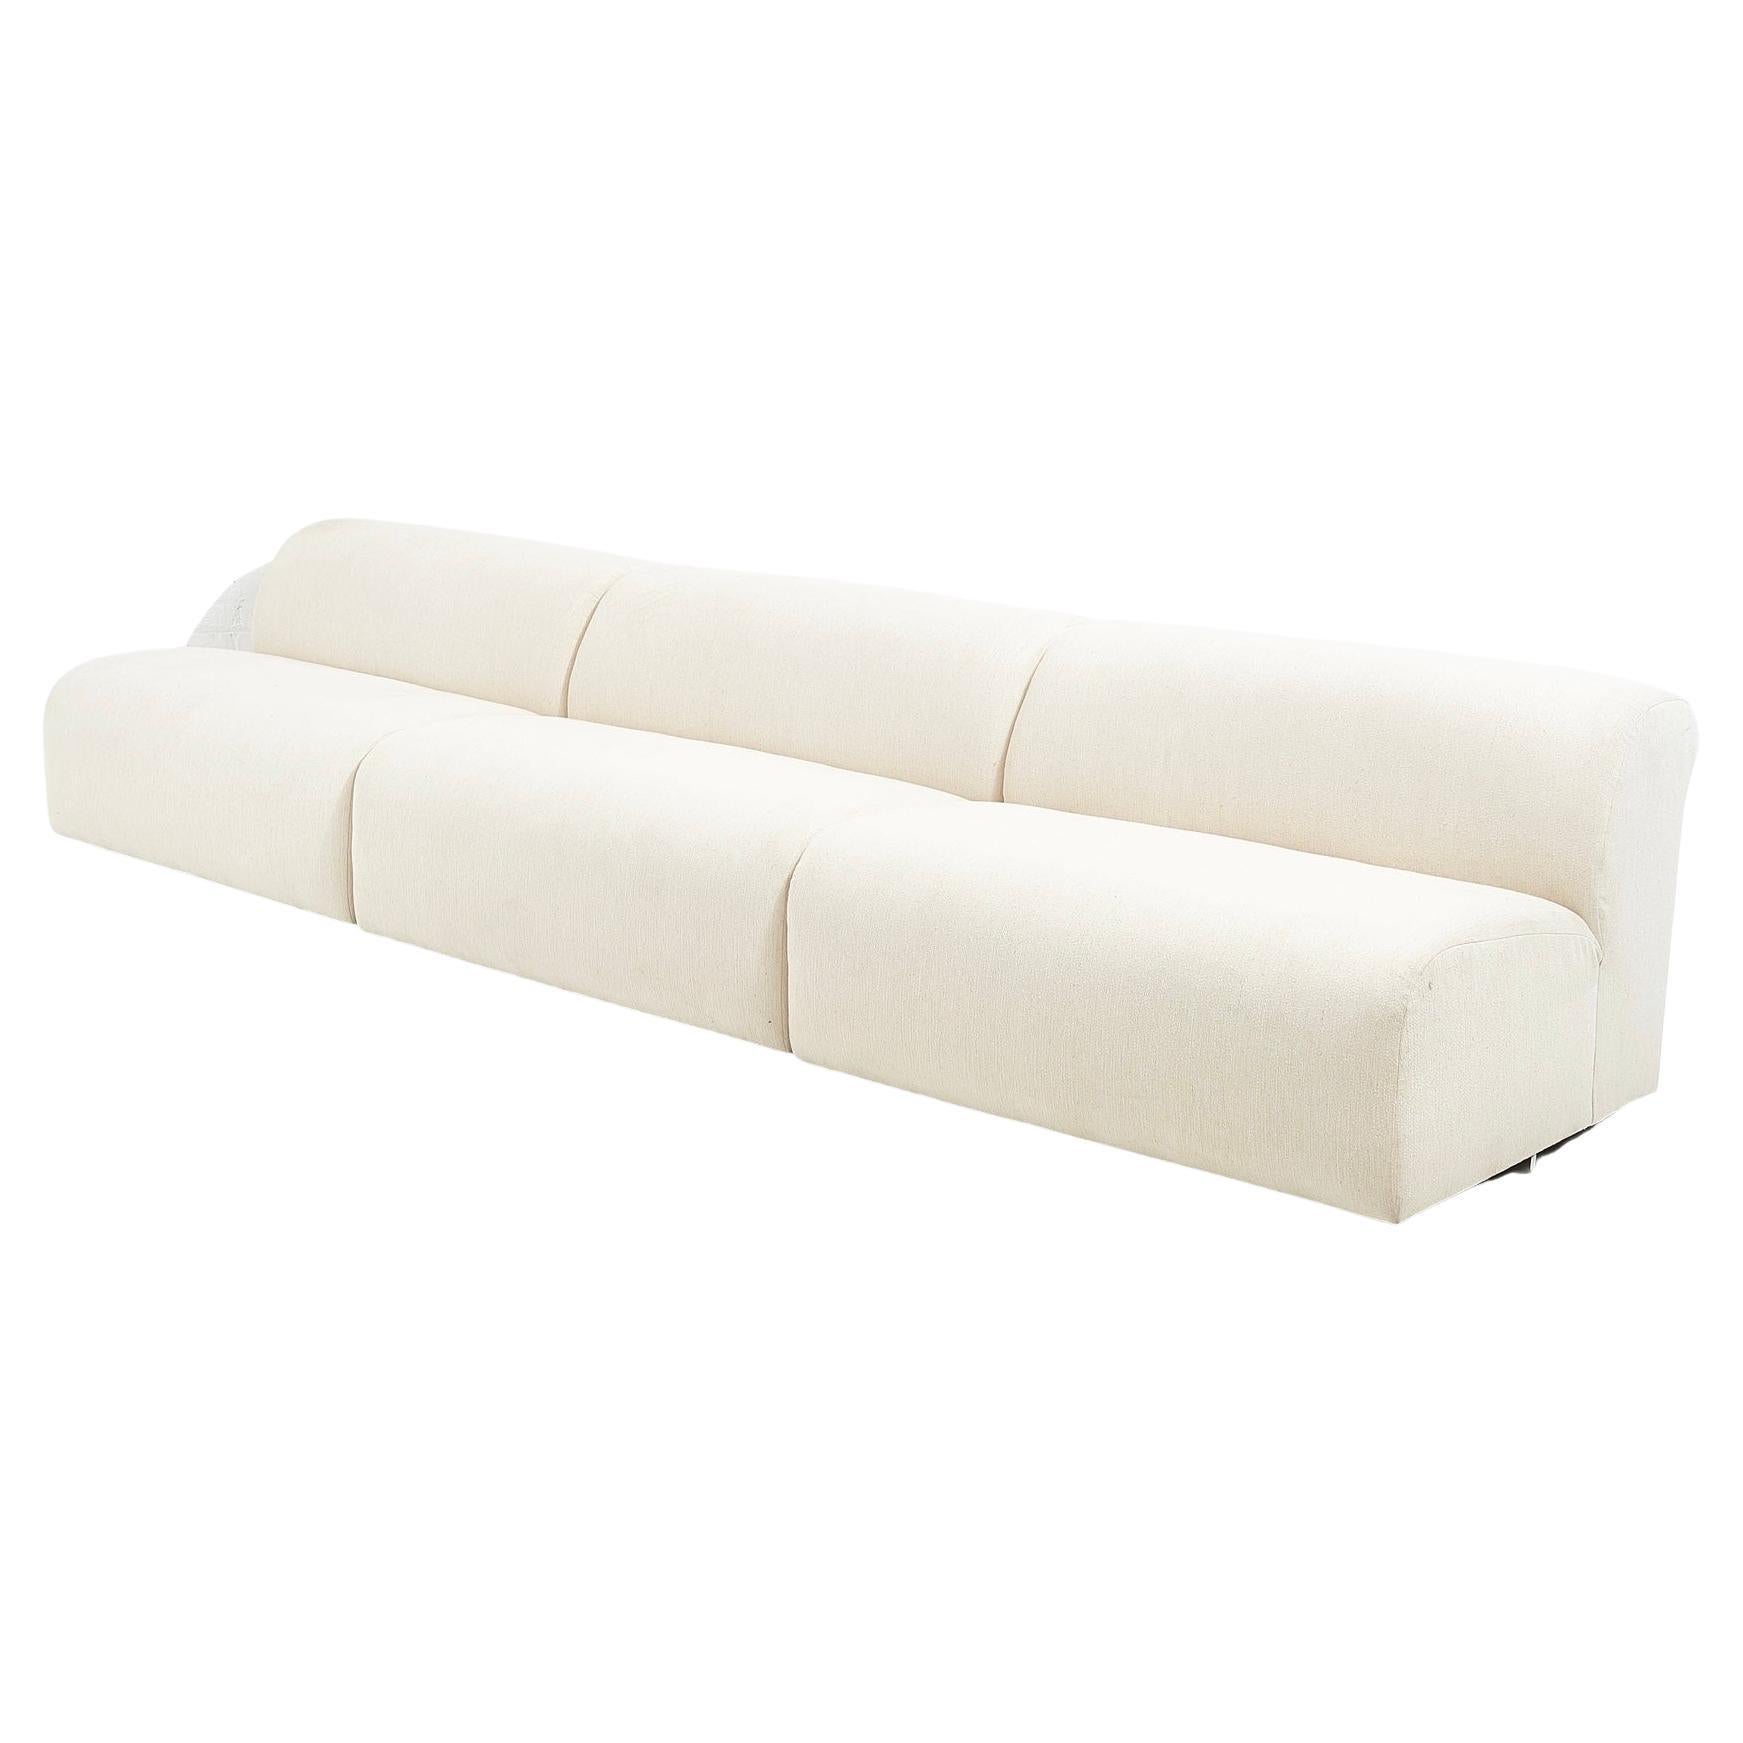 3 Piece Modular sectional sofa by Vladimir Kagan for Preview, 1988. Original white fabric is in good condition. There is a spot on one cushion.

